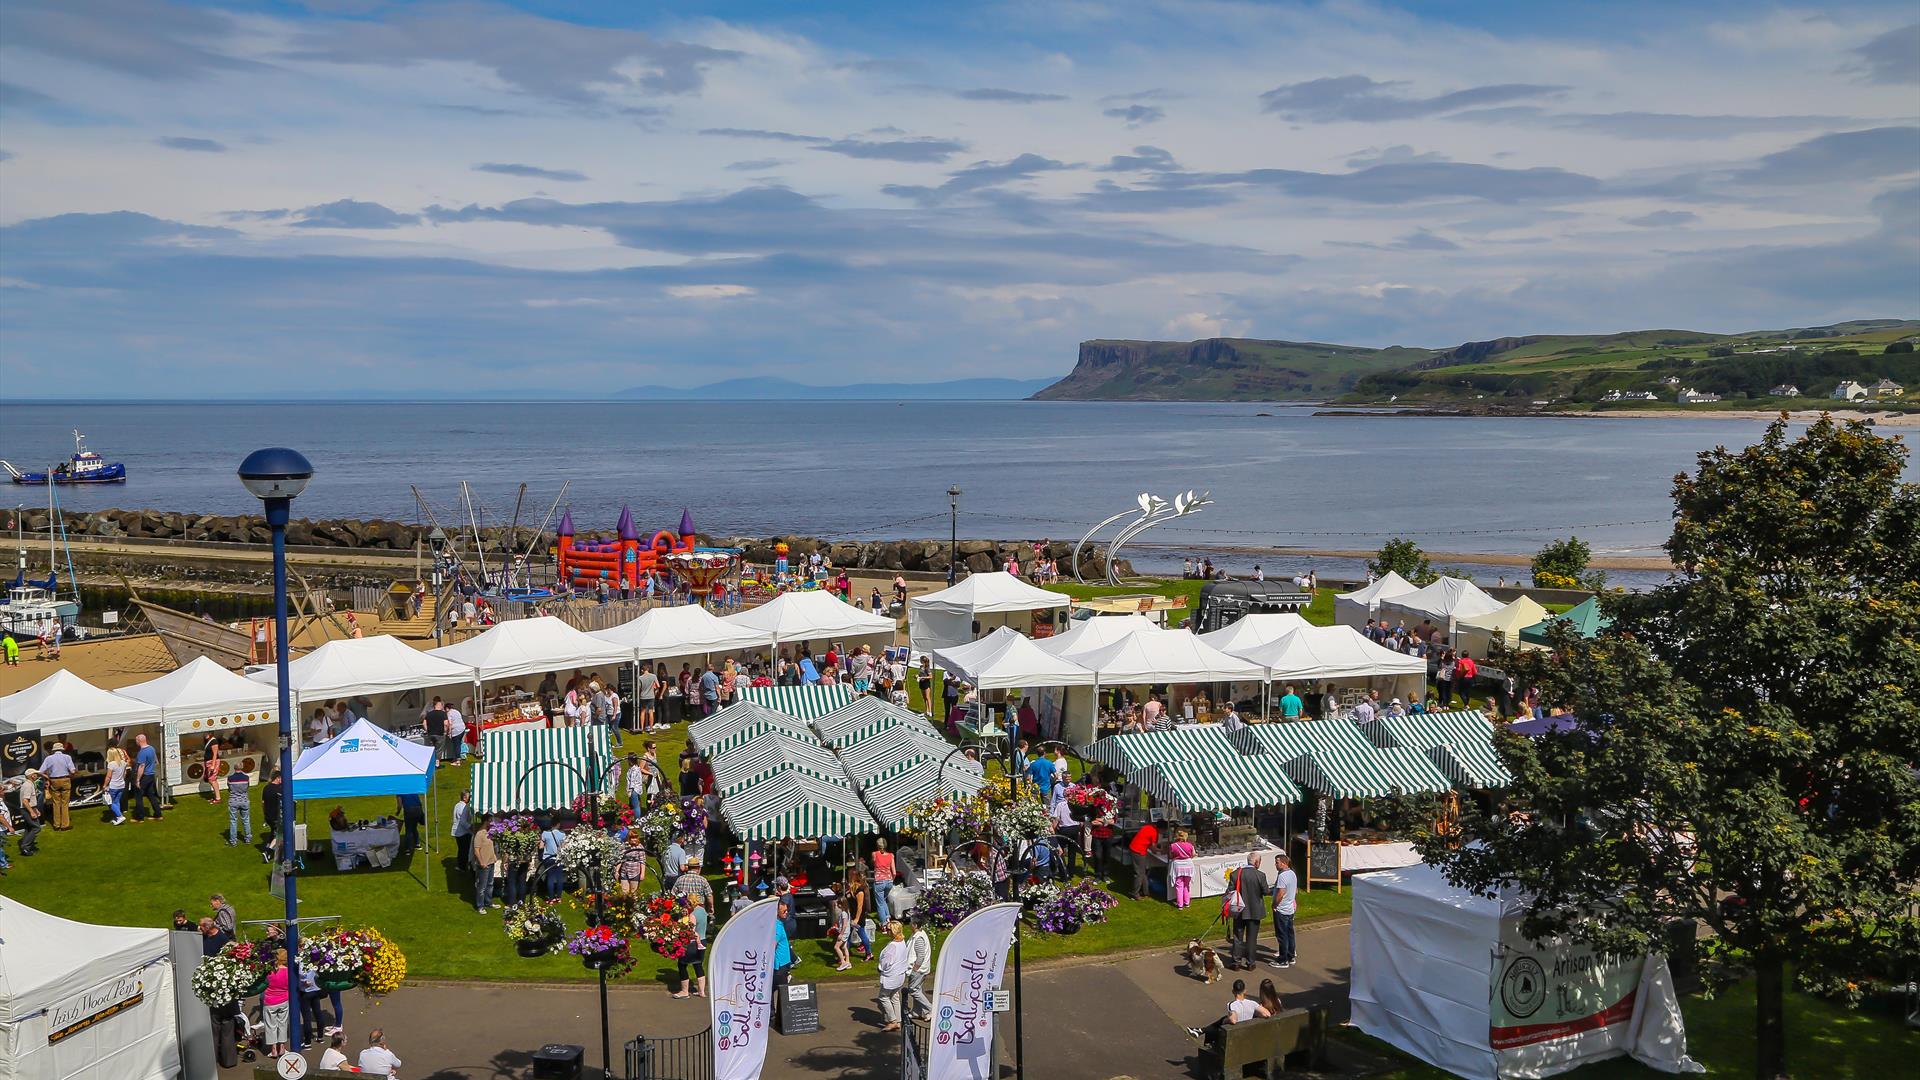 Overhead Image showing coastline at Ballycastle, sea in background.  Foreground shows green and white striped tents, people browsing round the markets